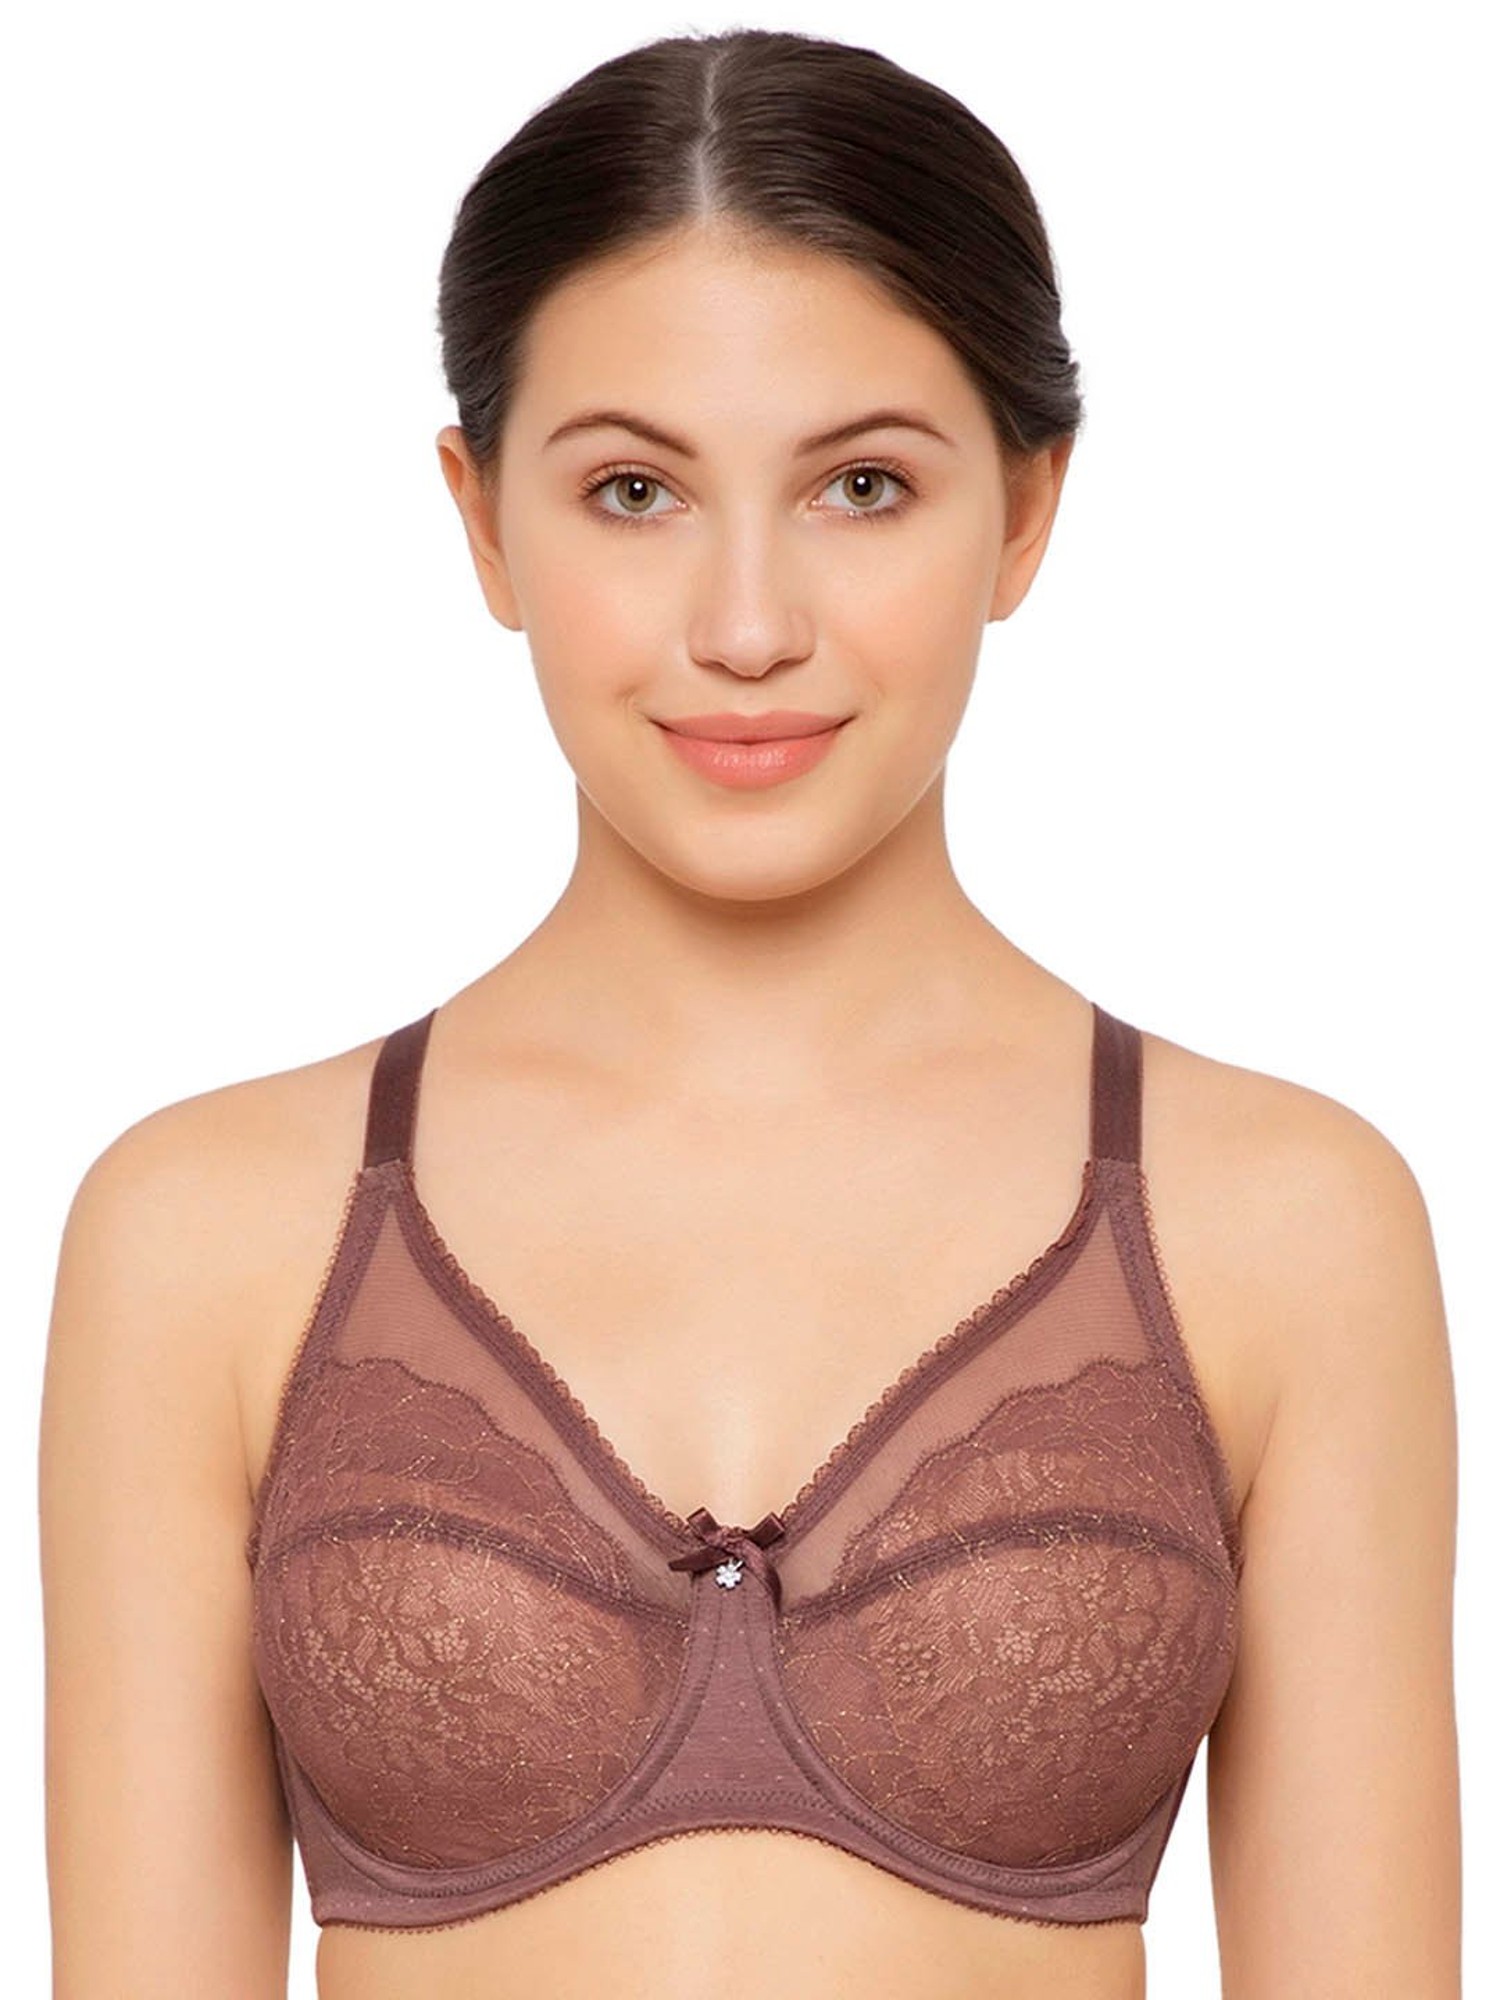 Wacoal Retro Chic Non-Padded Wired Full Coverage Full Support Everyday  Comfort Bra - Blue